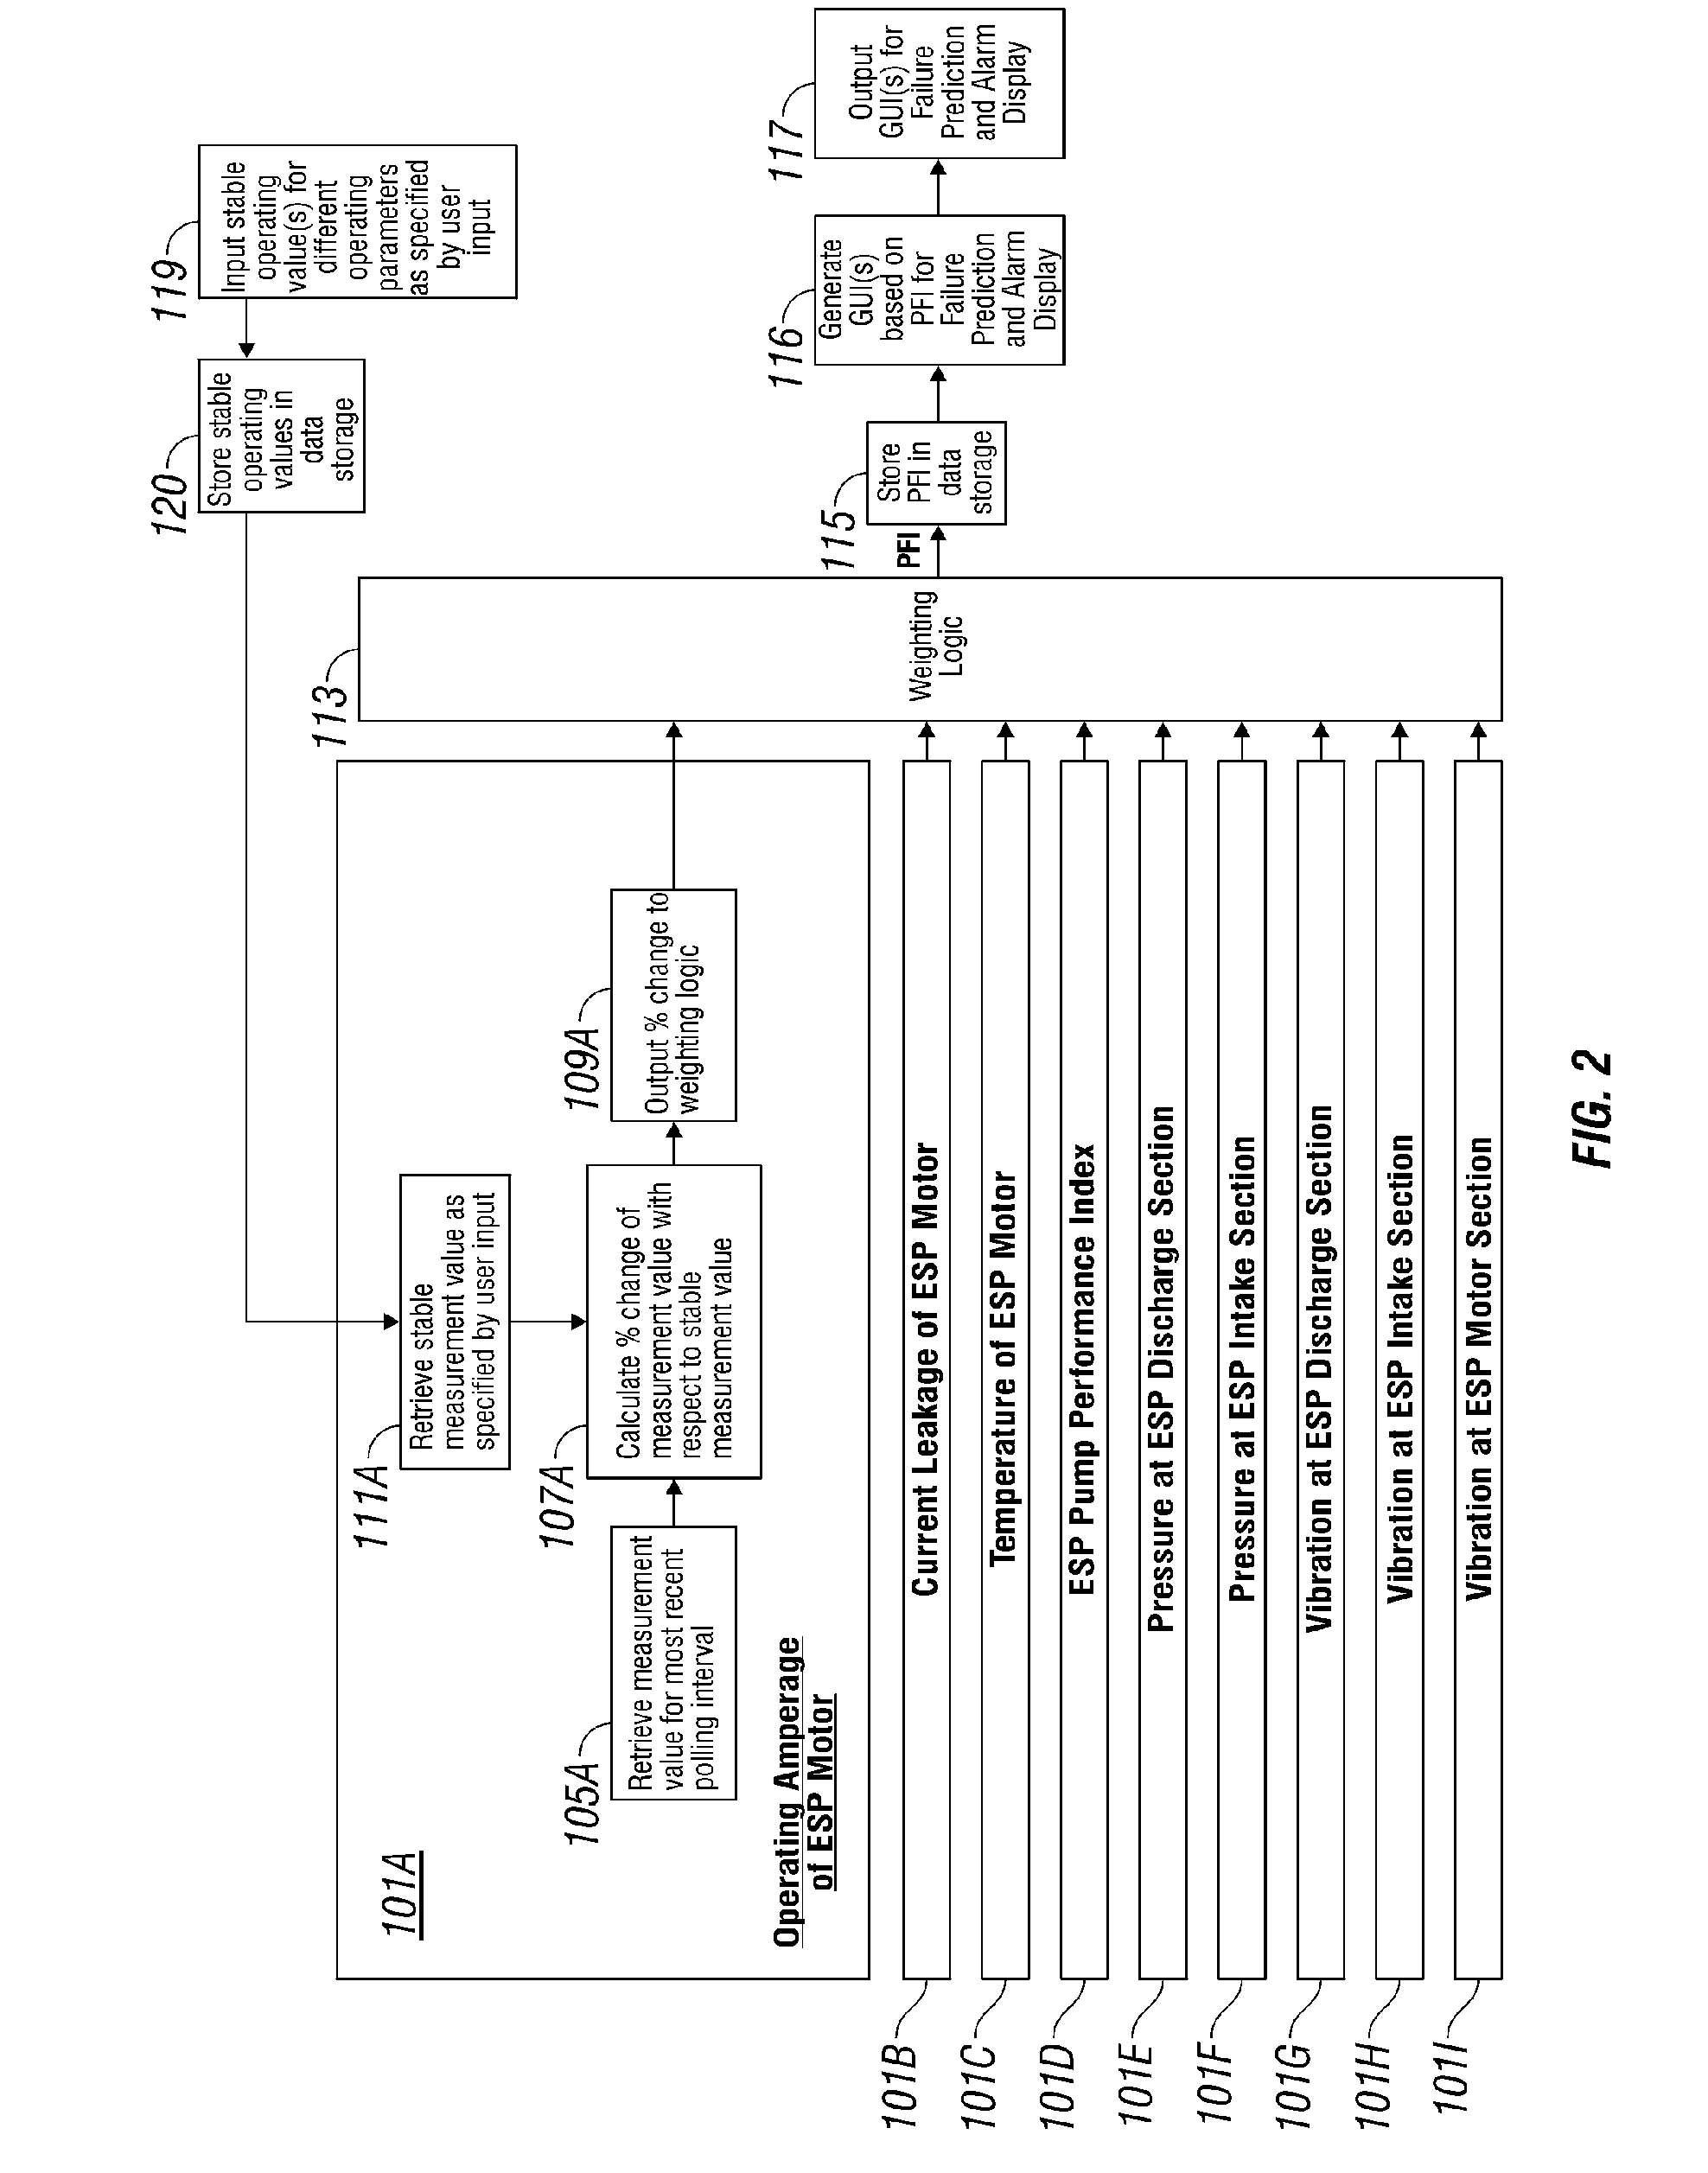 System and Method for Real-Time Monitoring and Failure Prediction of Electrical Submersible Pumps